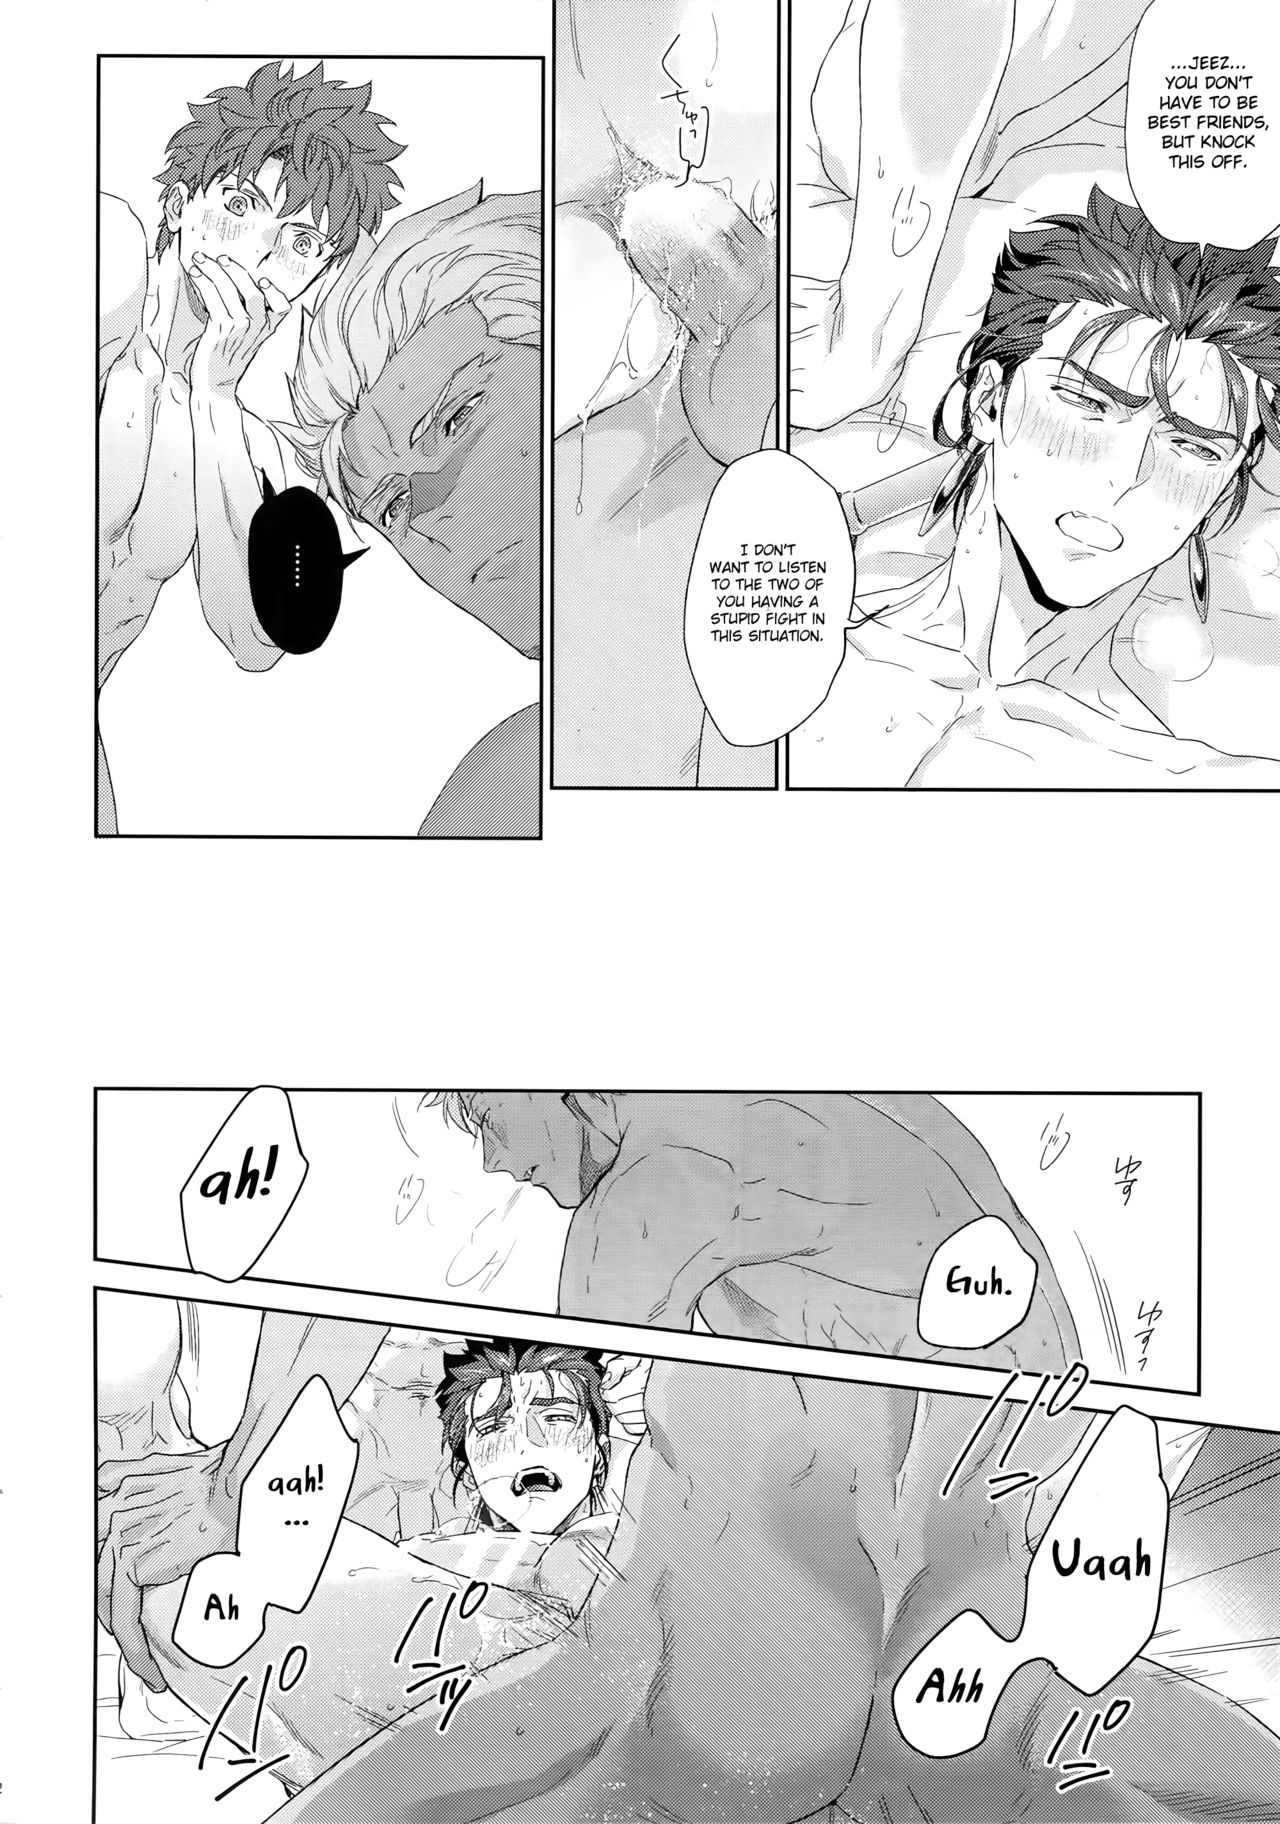 (Dai 23-ji ROOT4to5) [RED (koi)] Melange (Fate/stay night) [English] {GrapeJellyScans} [Decensored] page 31 full